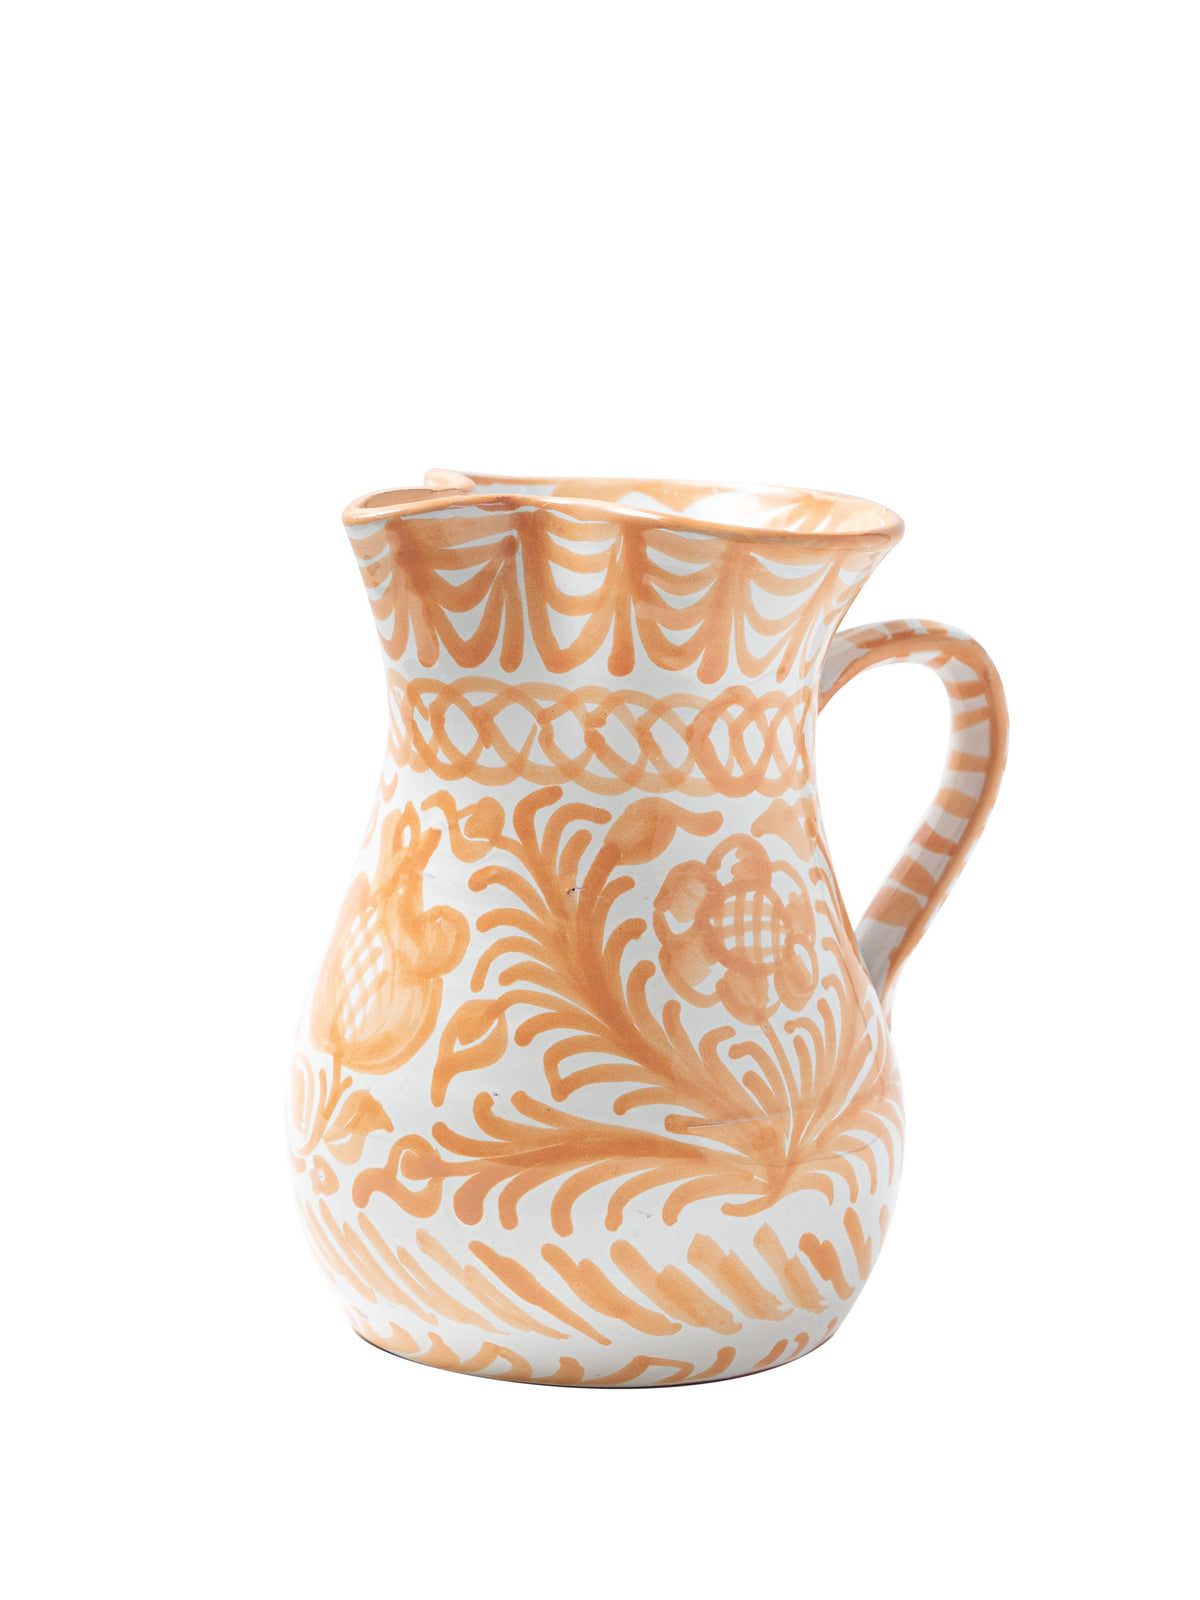 Casa Melocoton Medium Pitcher with Hand-painted Designs